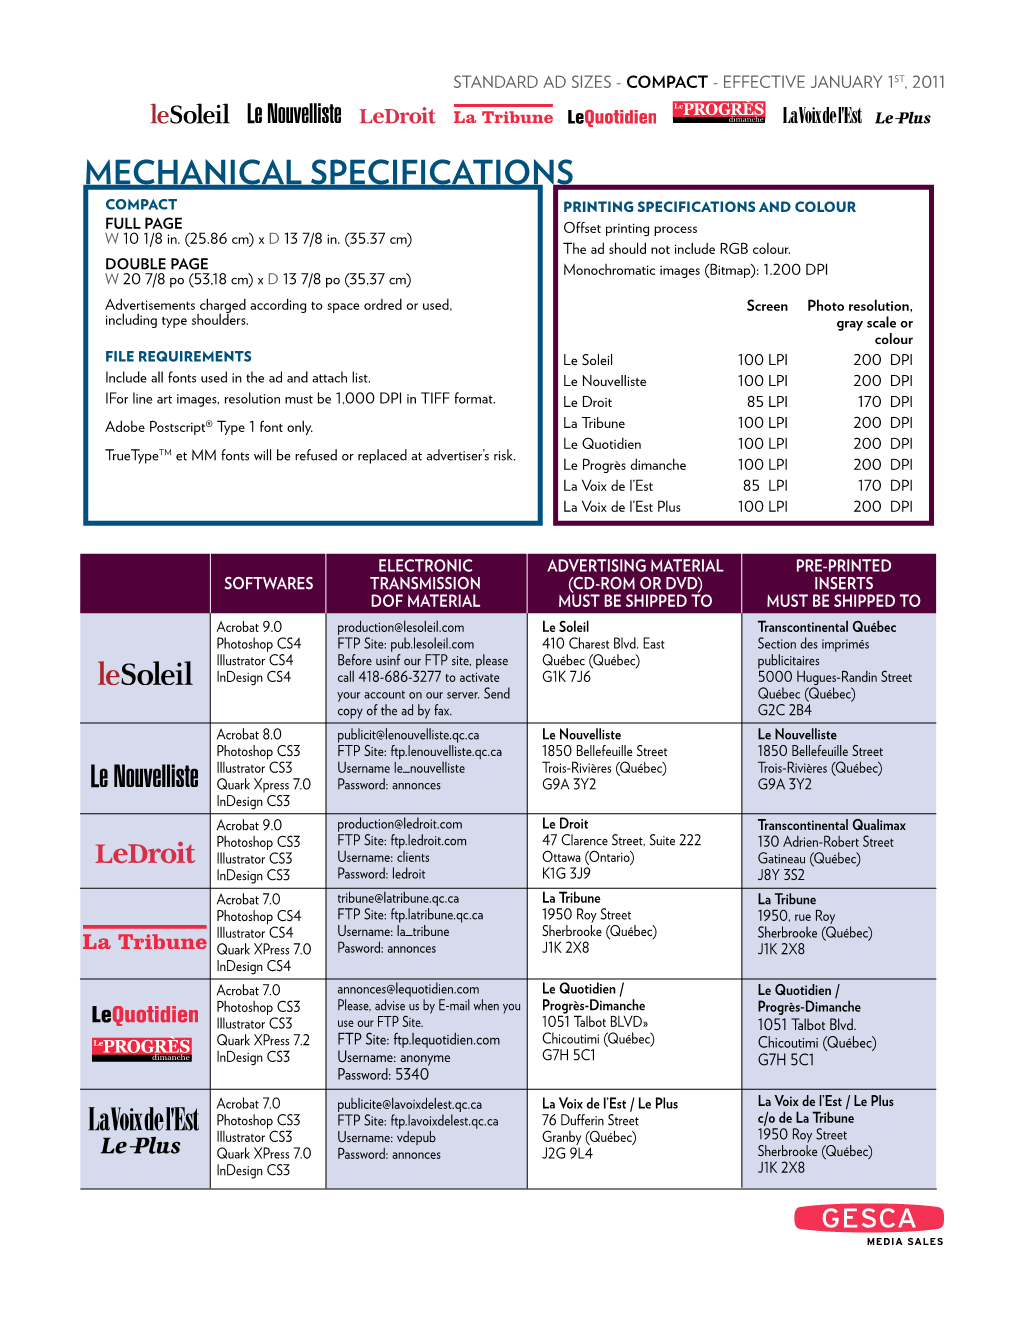 Mechanical Specifications COMPACT Printing Specifications and Colour Full PAGE Offset Printing Process W 10 1/8 In